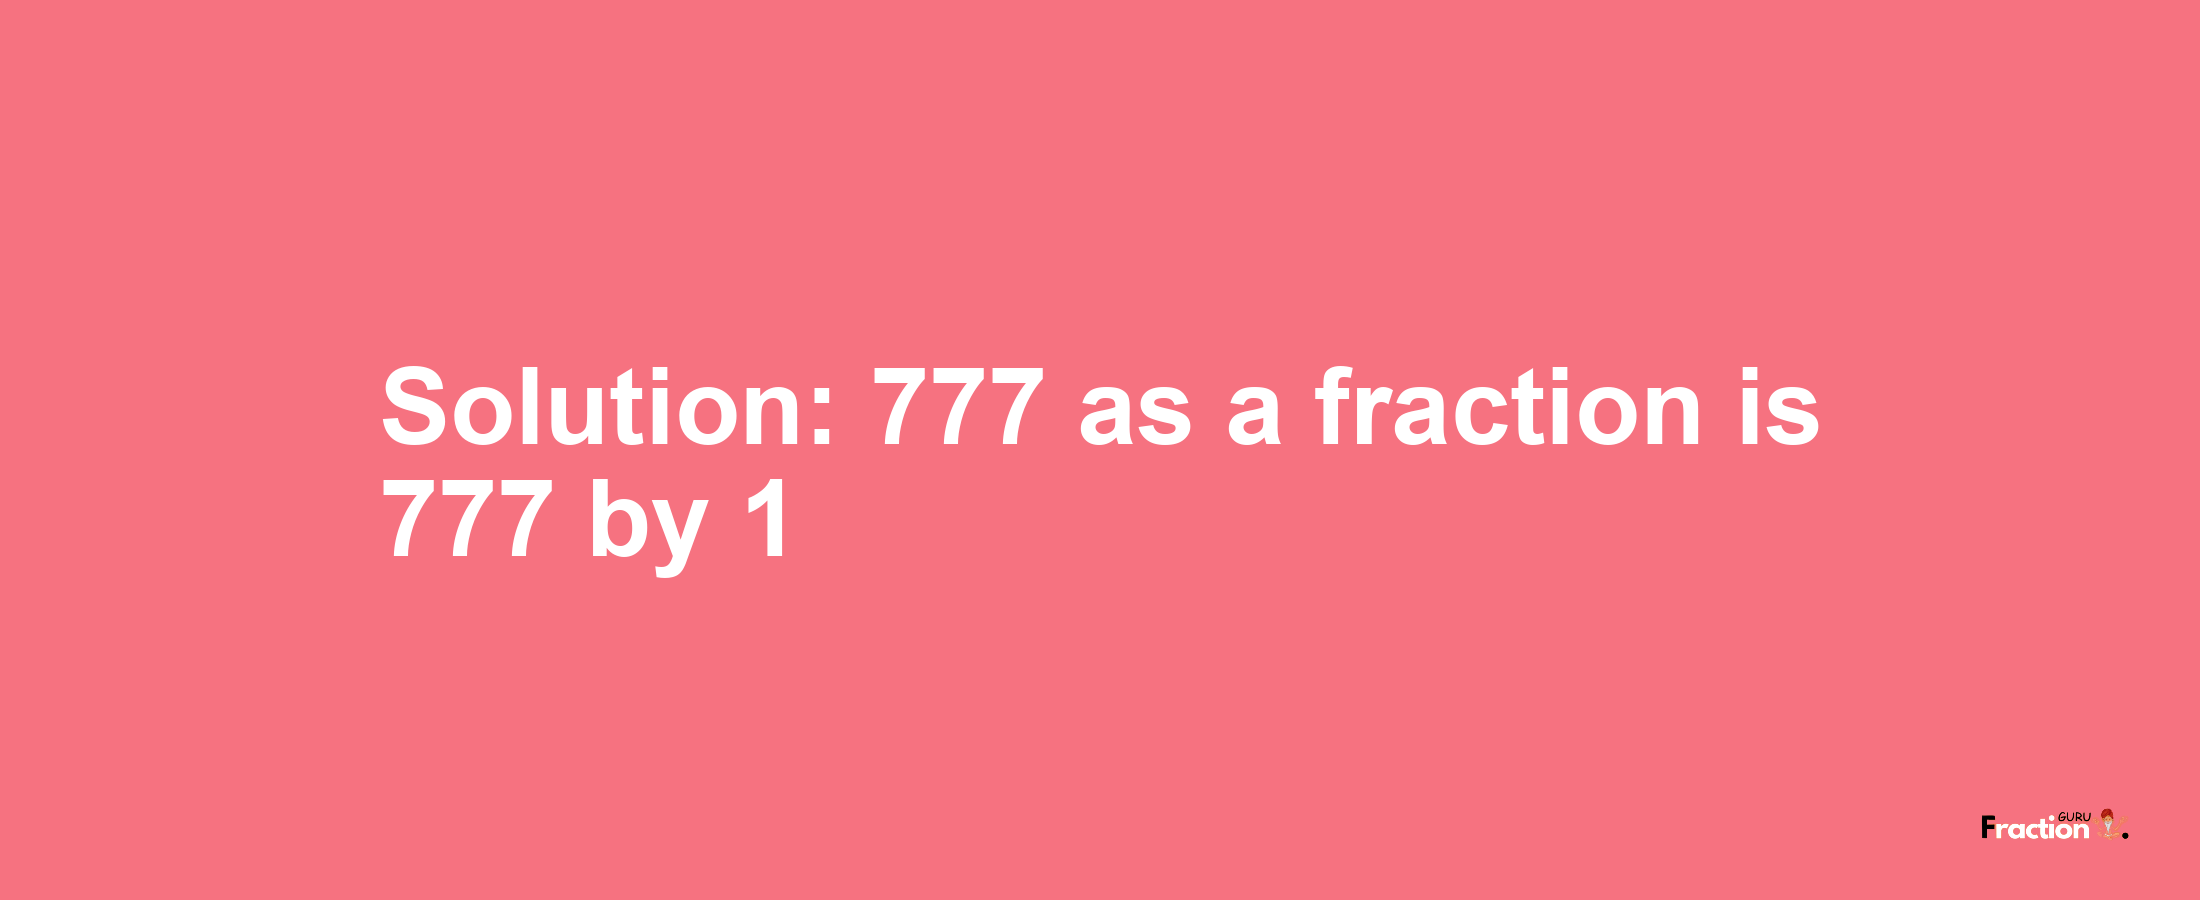 Solution:777 as a fraction is 777/1